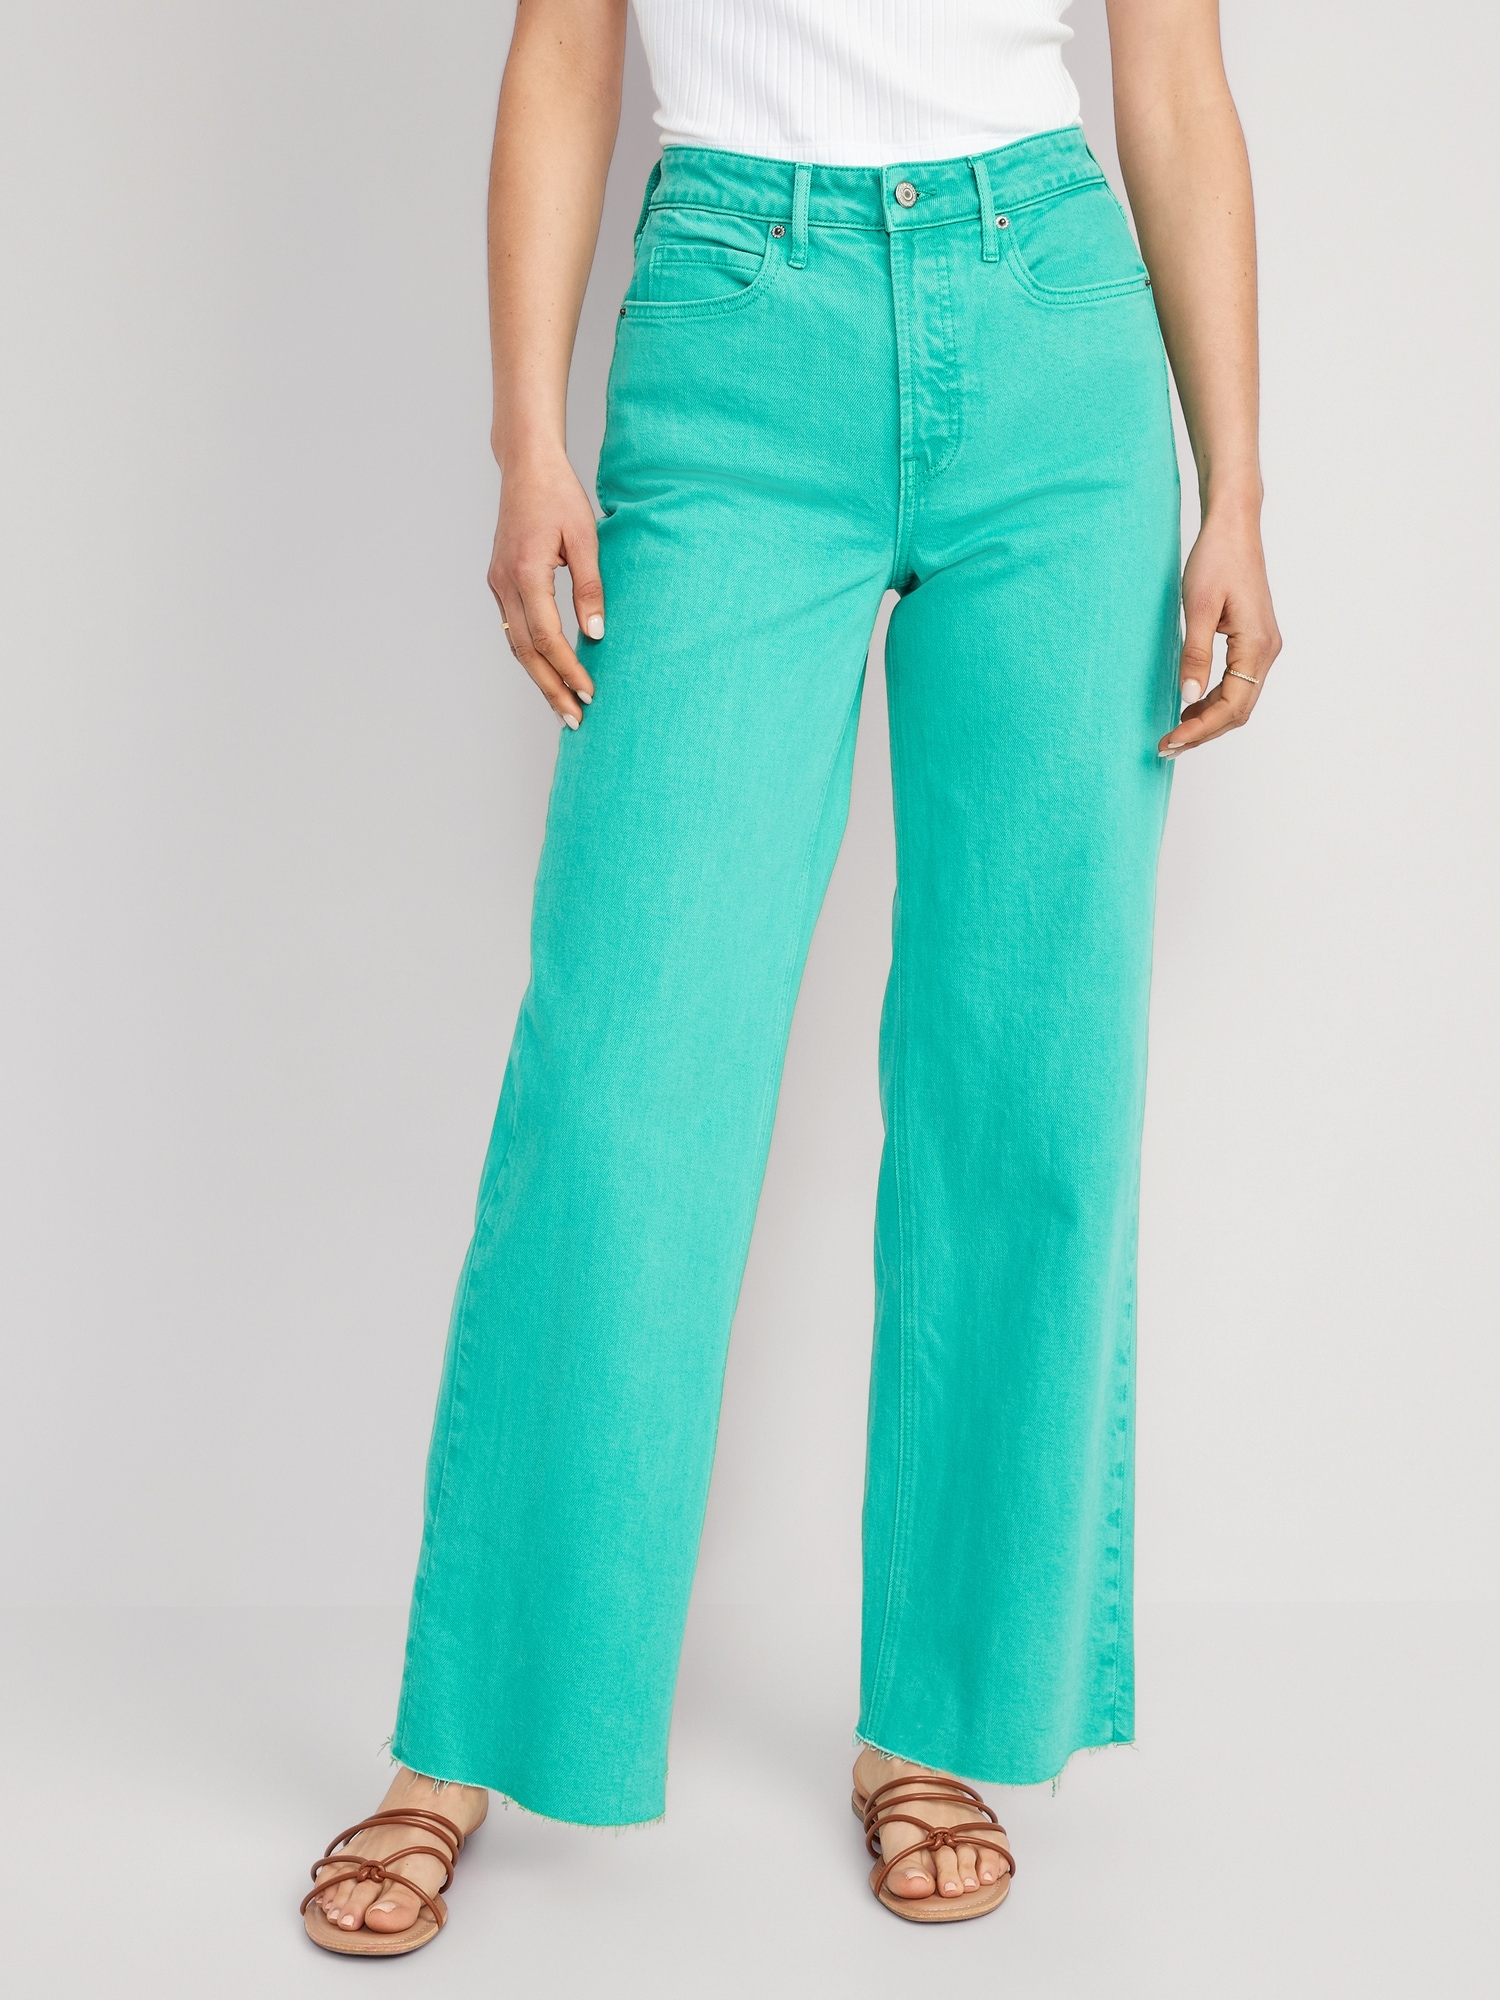 Old Navy Extra High-Waisted Pop-Color Wide Leg Cut-Off Jeans for Women green. 1